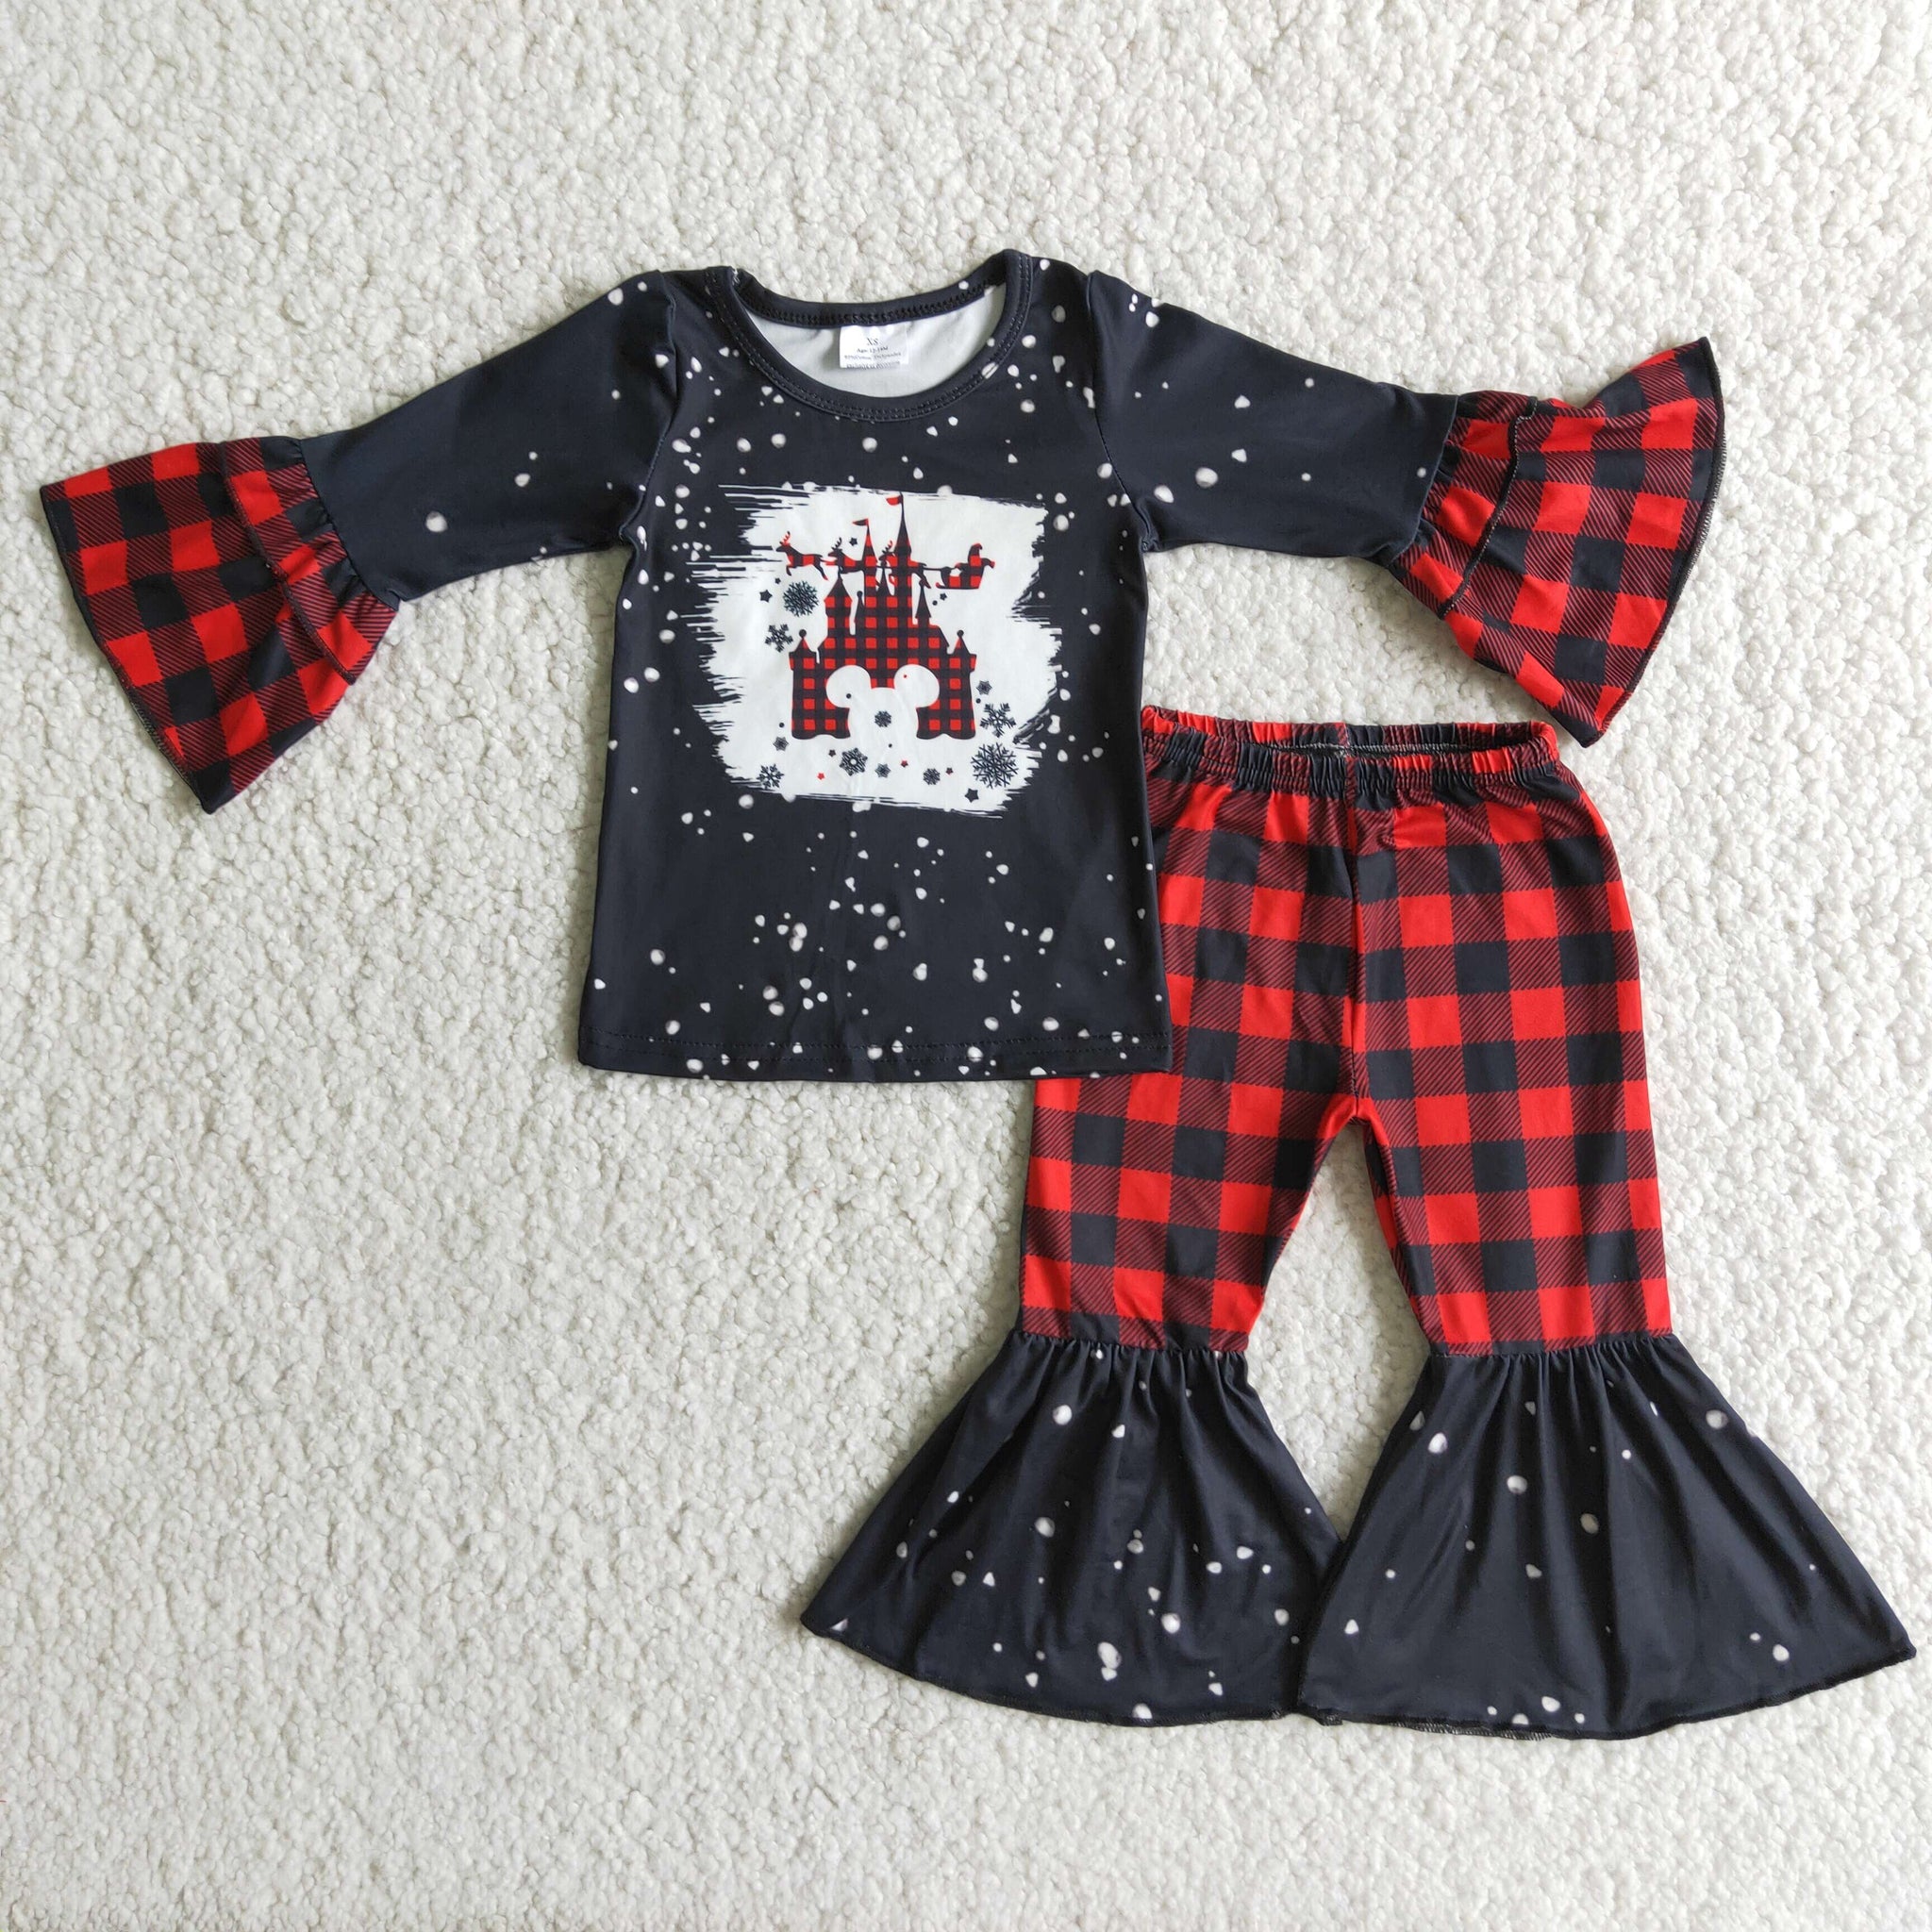 6 A16-19 baby girl clothes black plaid winter outfits